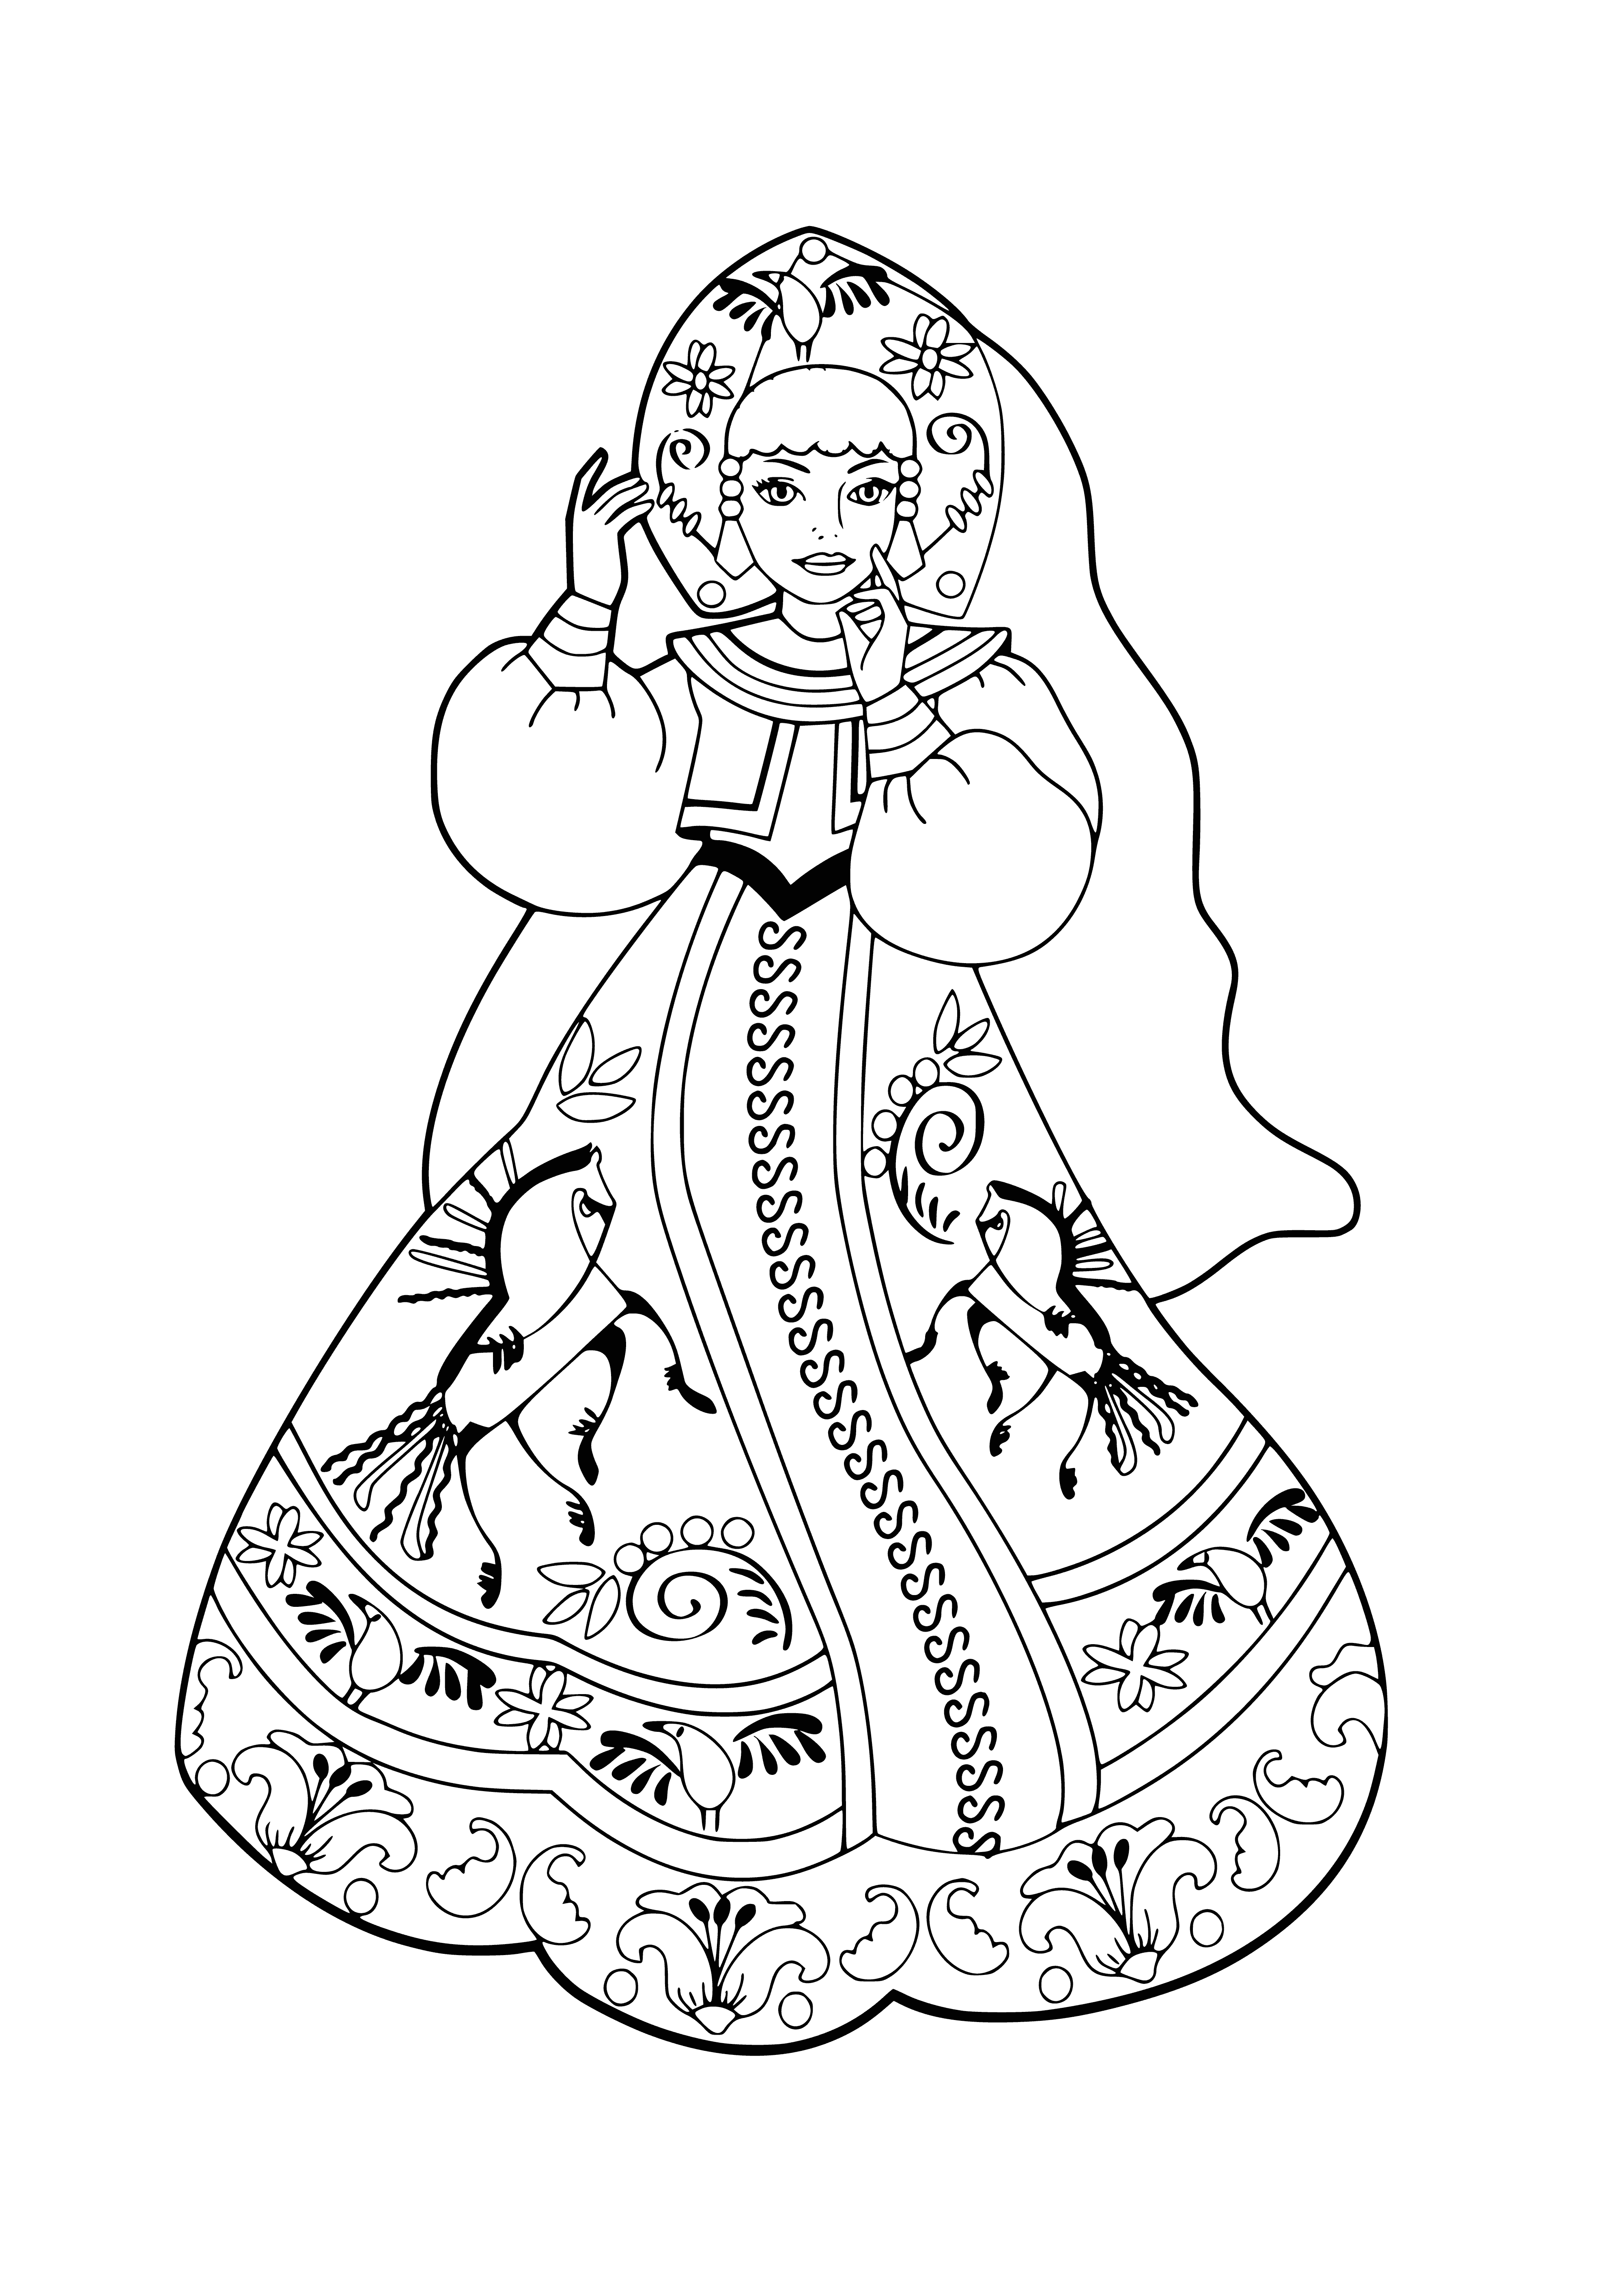 Outfits of Russian beauties coloring page